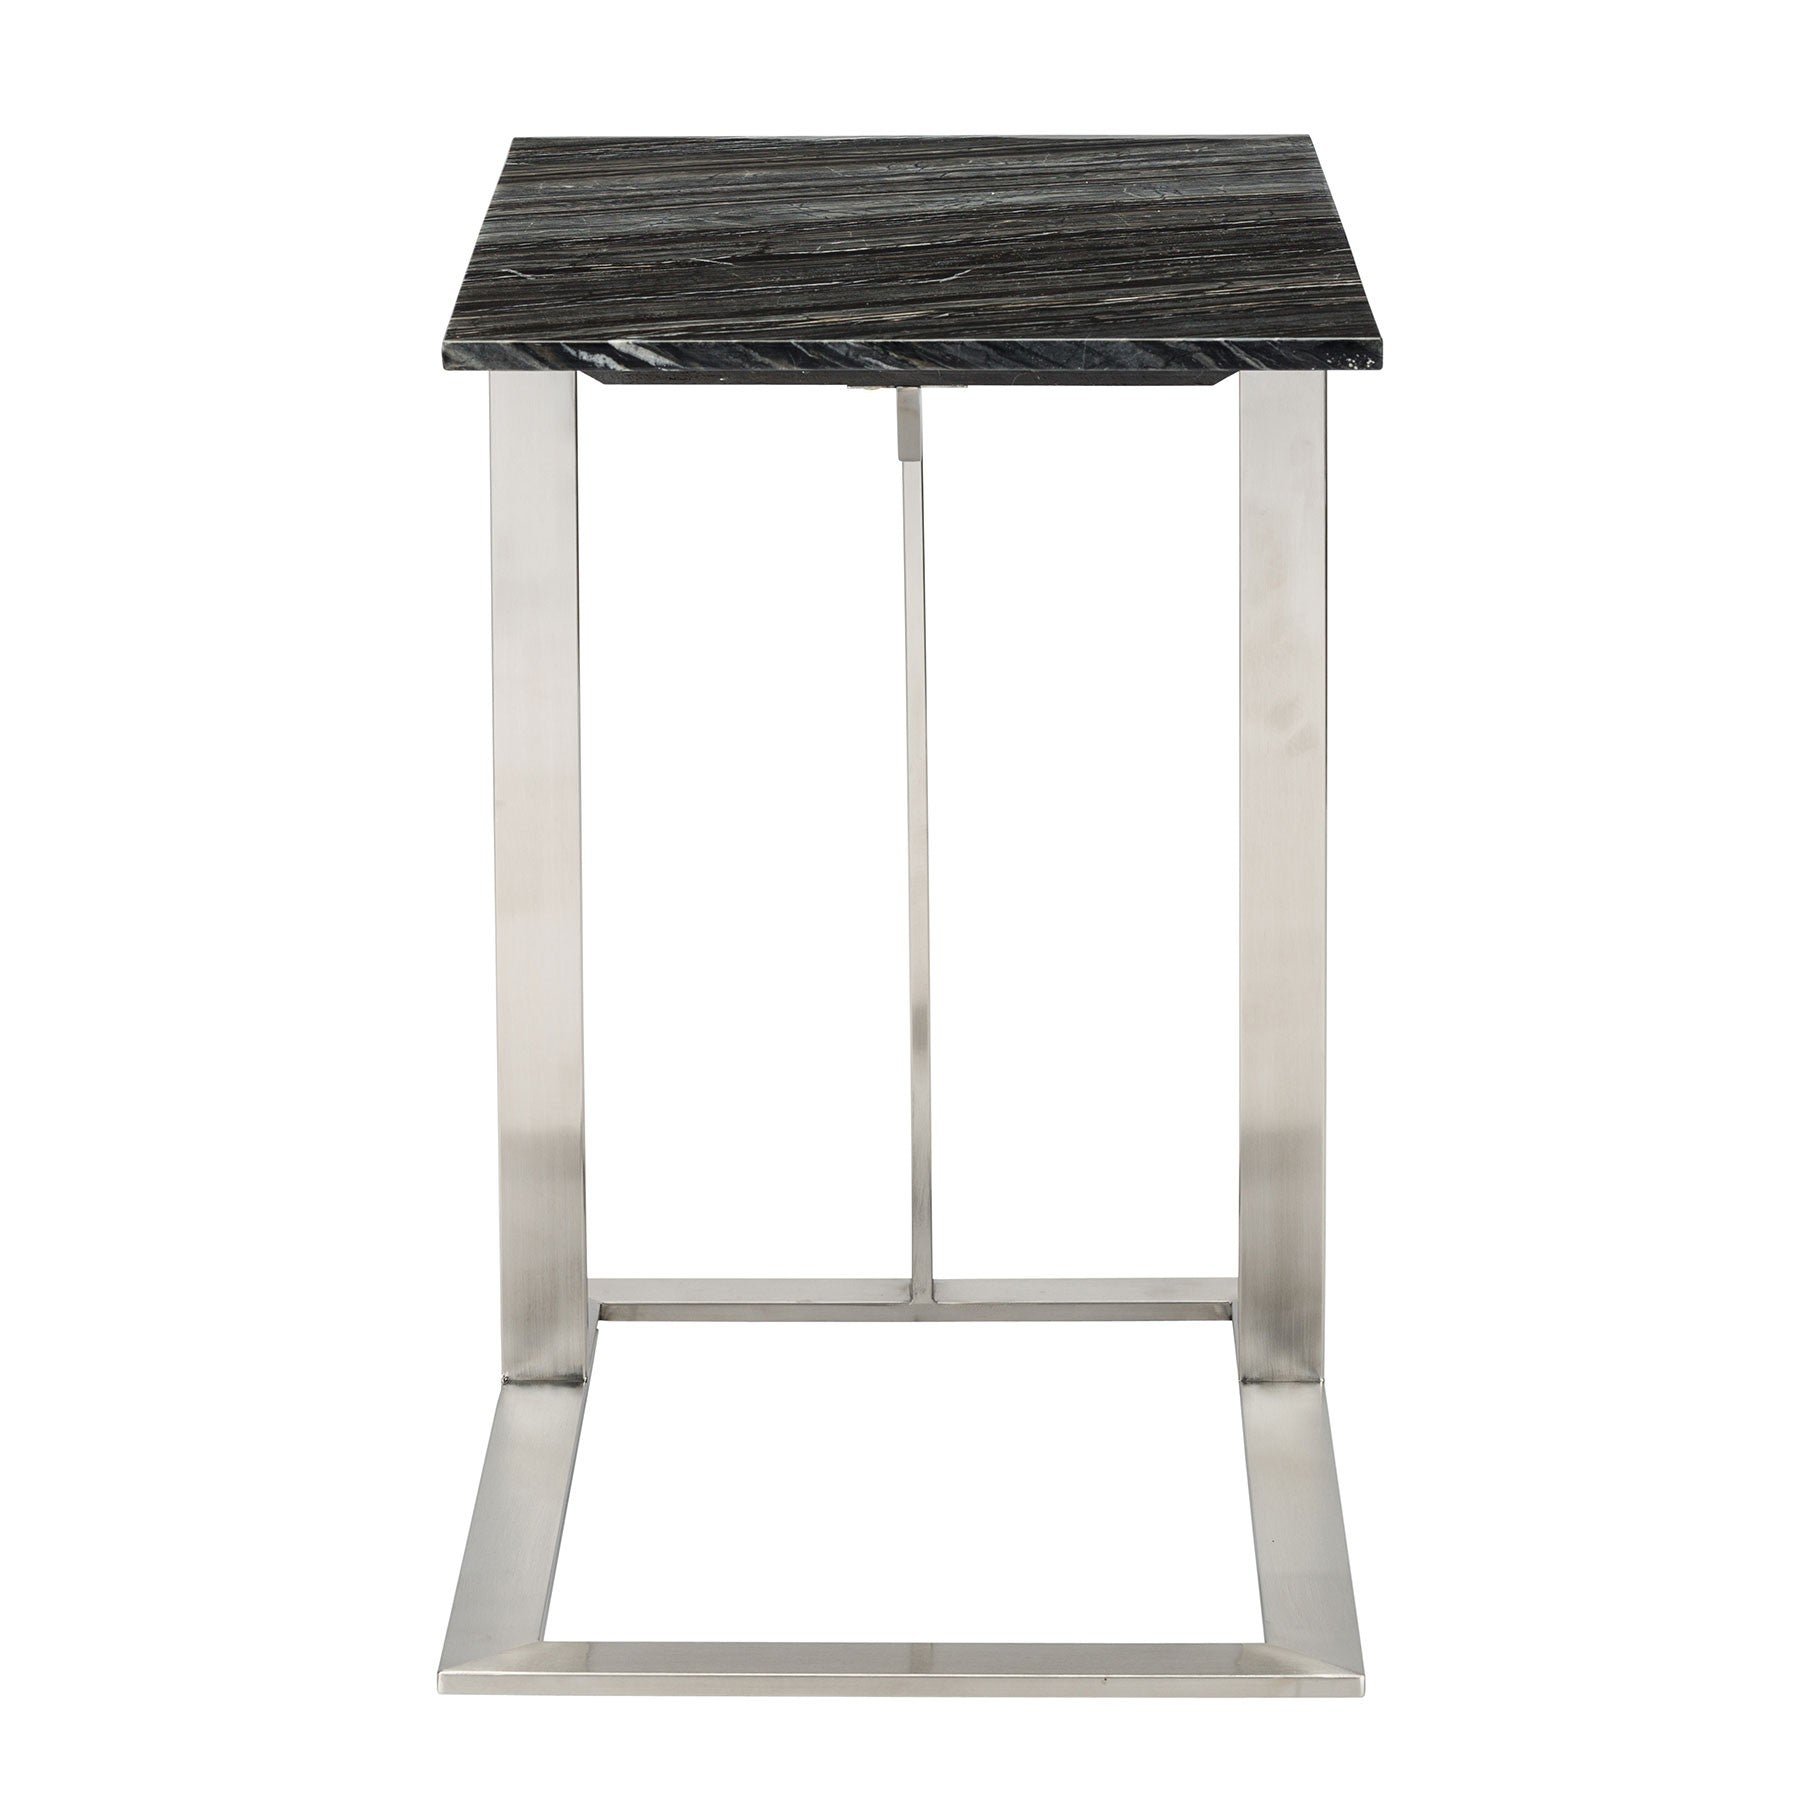 DELL SIDE TABLE - BLACK WOOD VEIN - Home Office Makeover